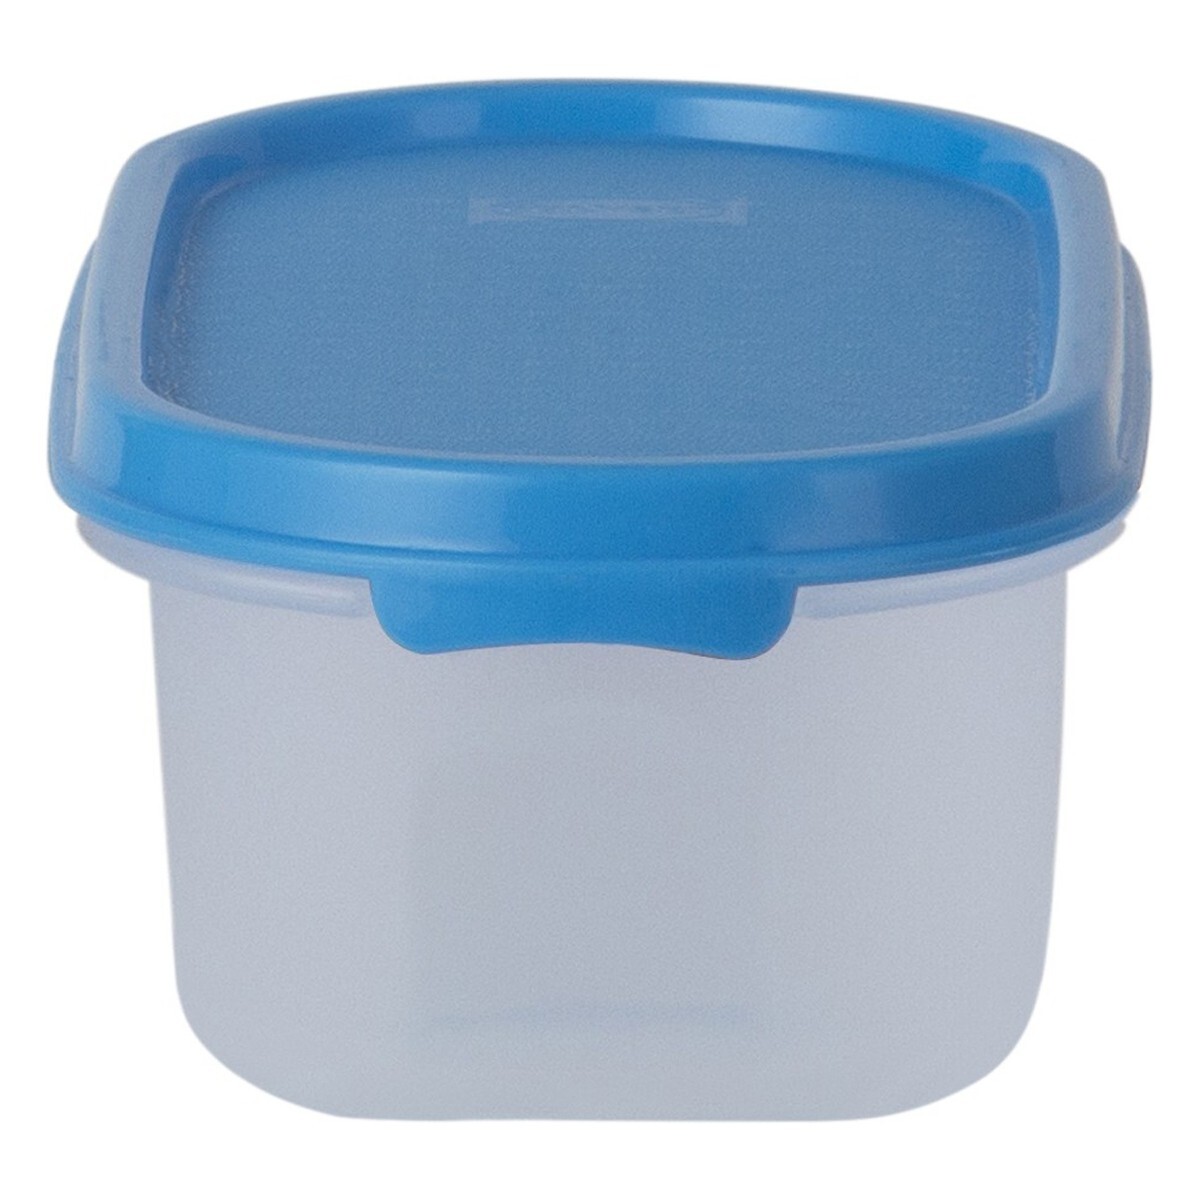 Polyset Container Magic Seal Oval-0.5L